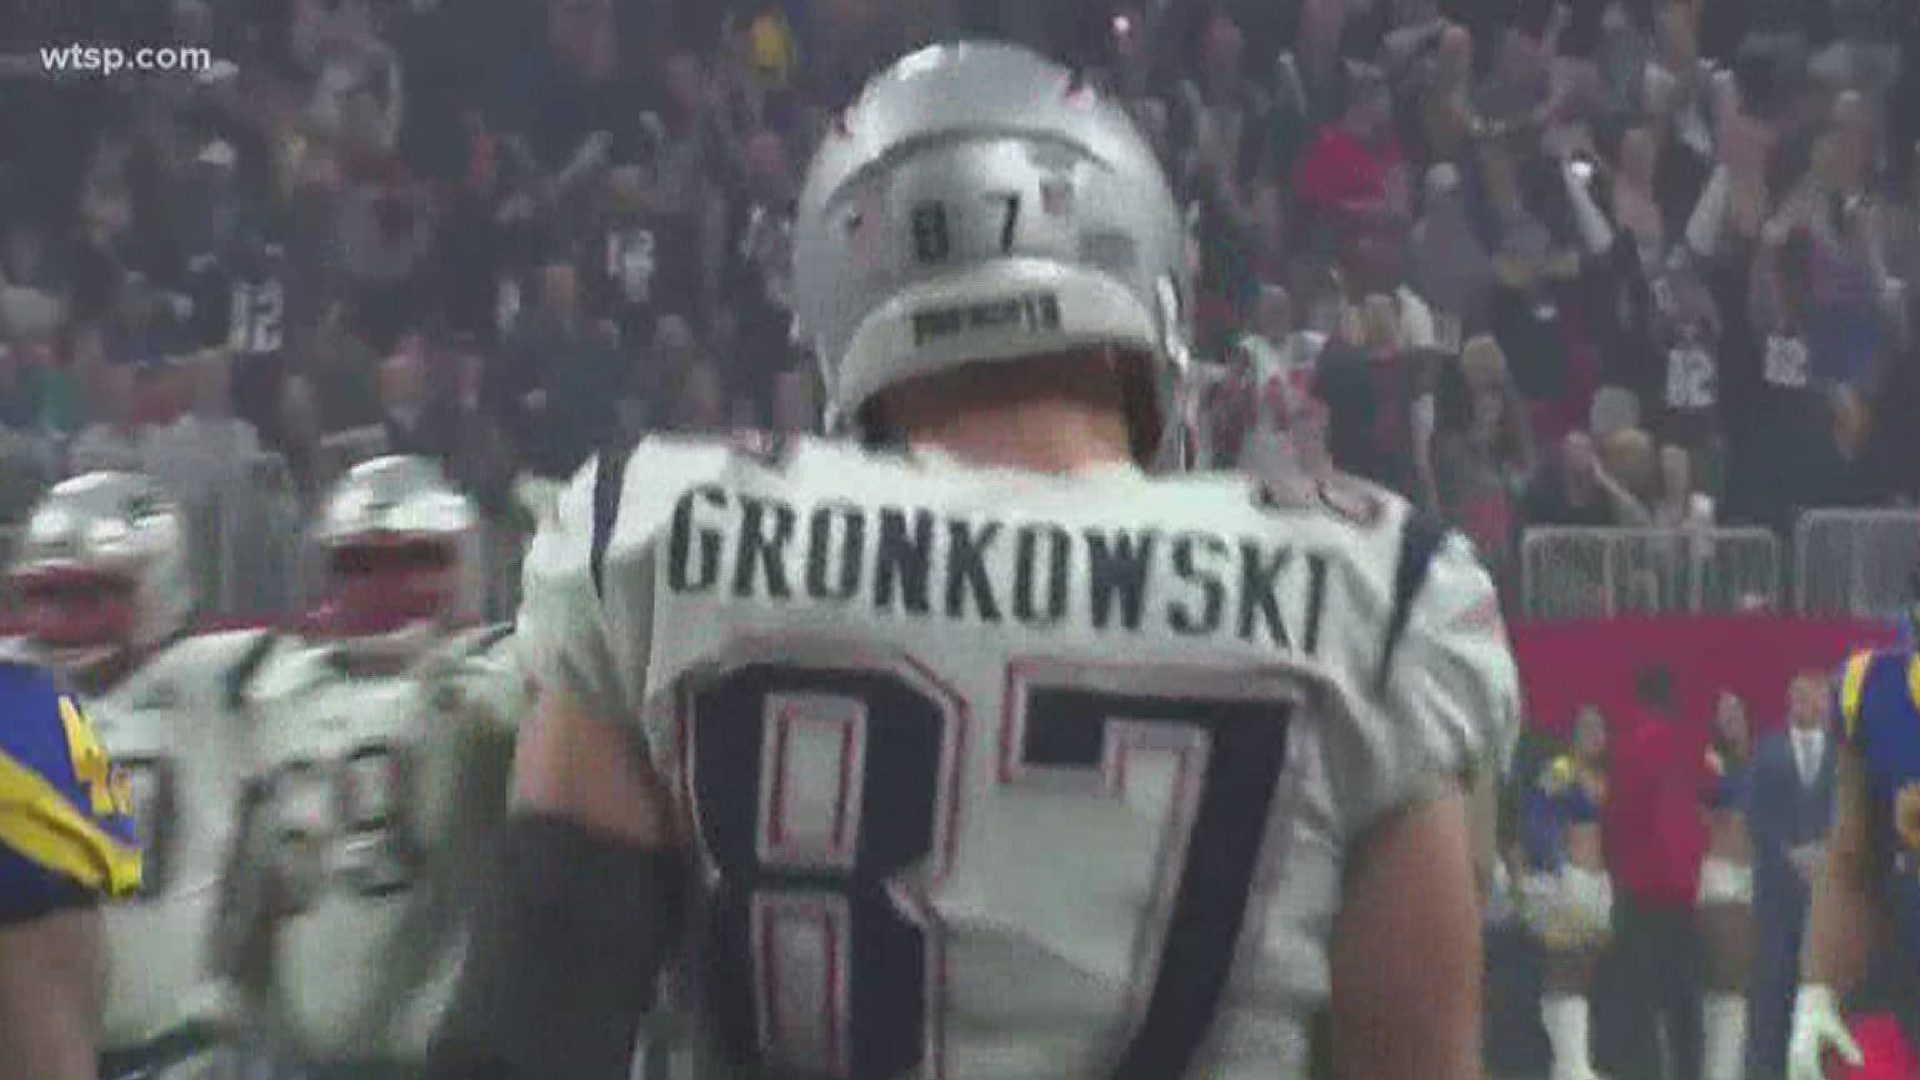 Tom Brady and Rob Gronkowski will played together, once again, in Tampa!